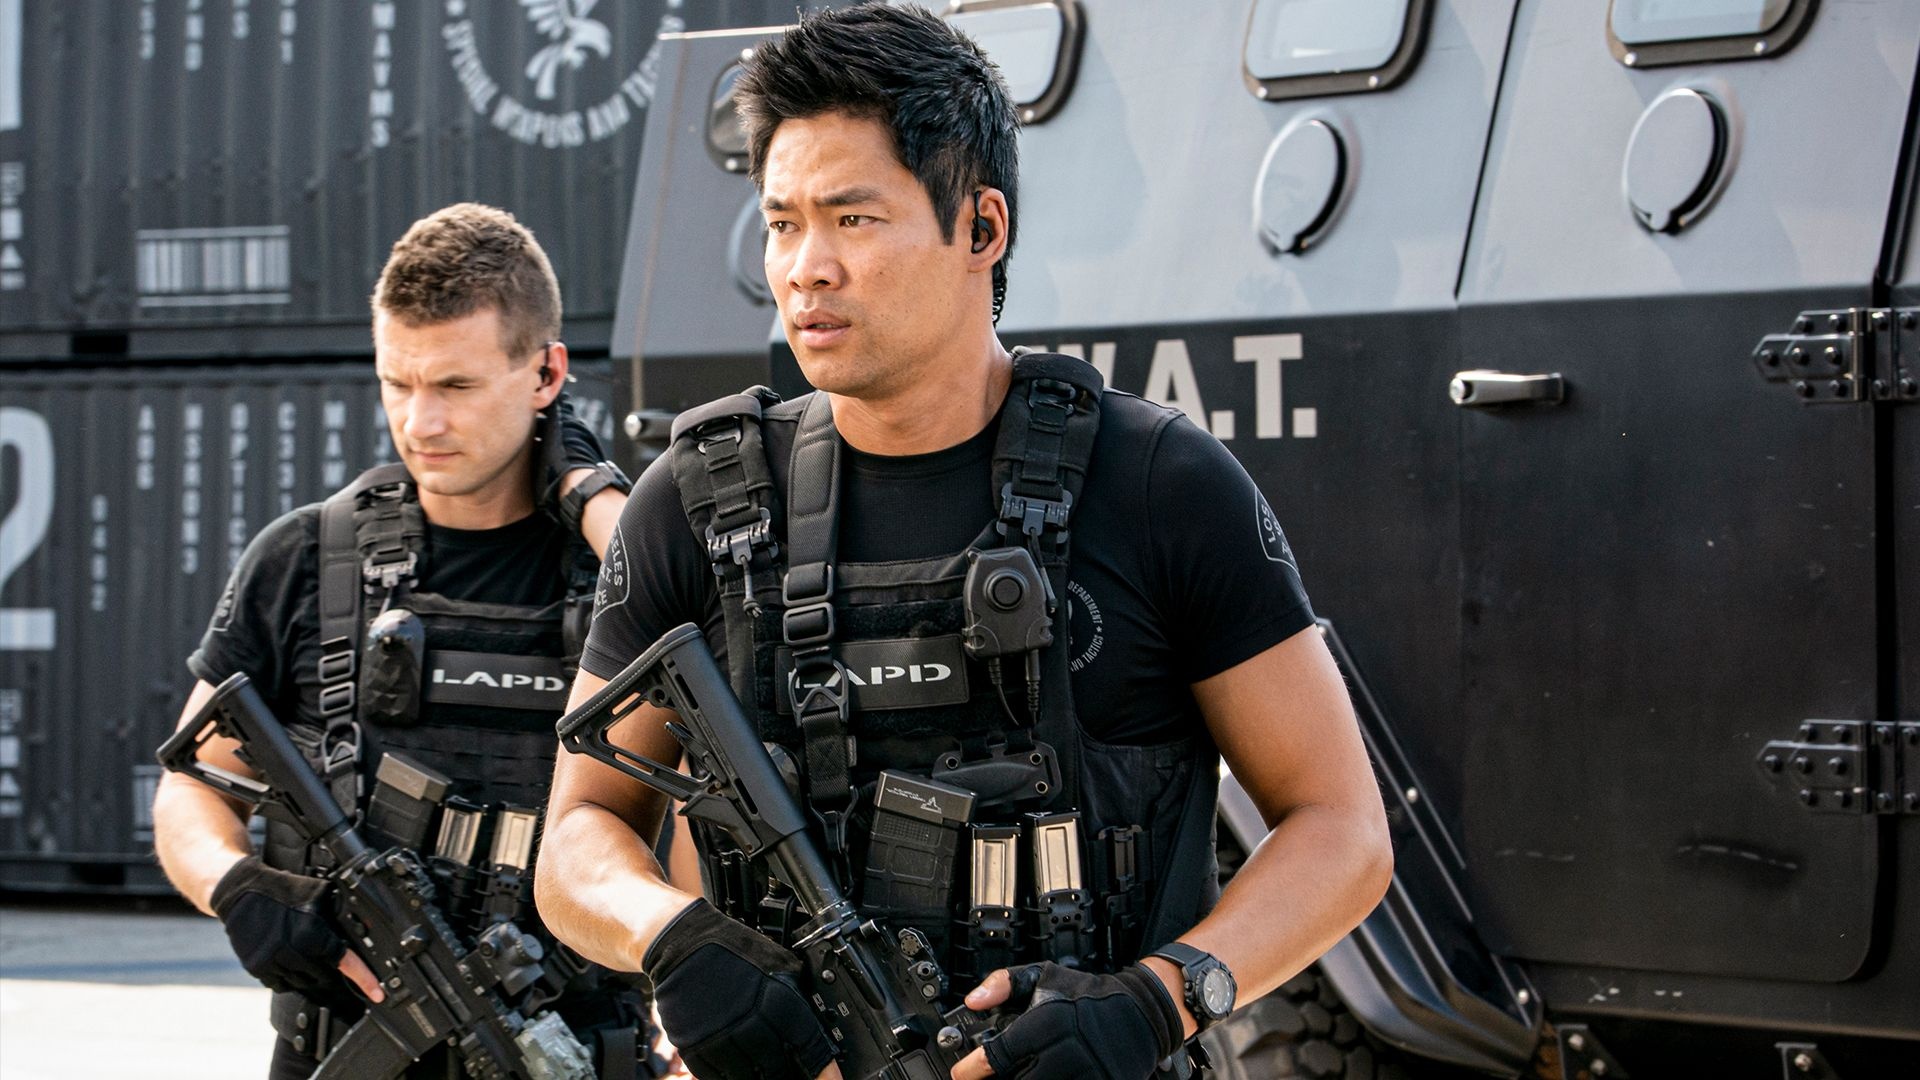 S. W. A. T. TV series, Season 6 renewal, Action-packed episodes, CBS show, 1920x1080 Full HD Desktop